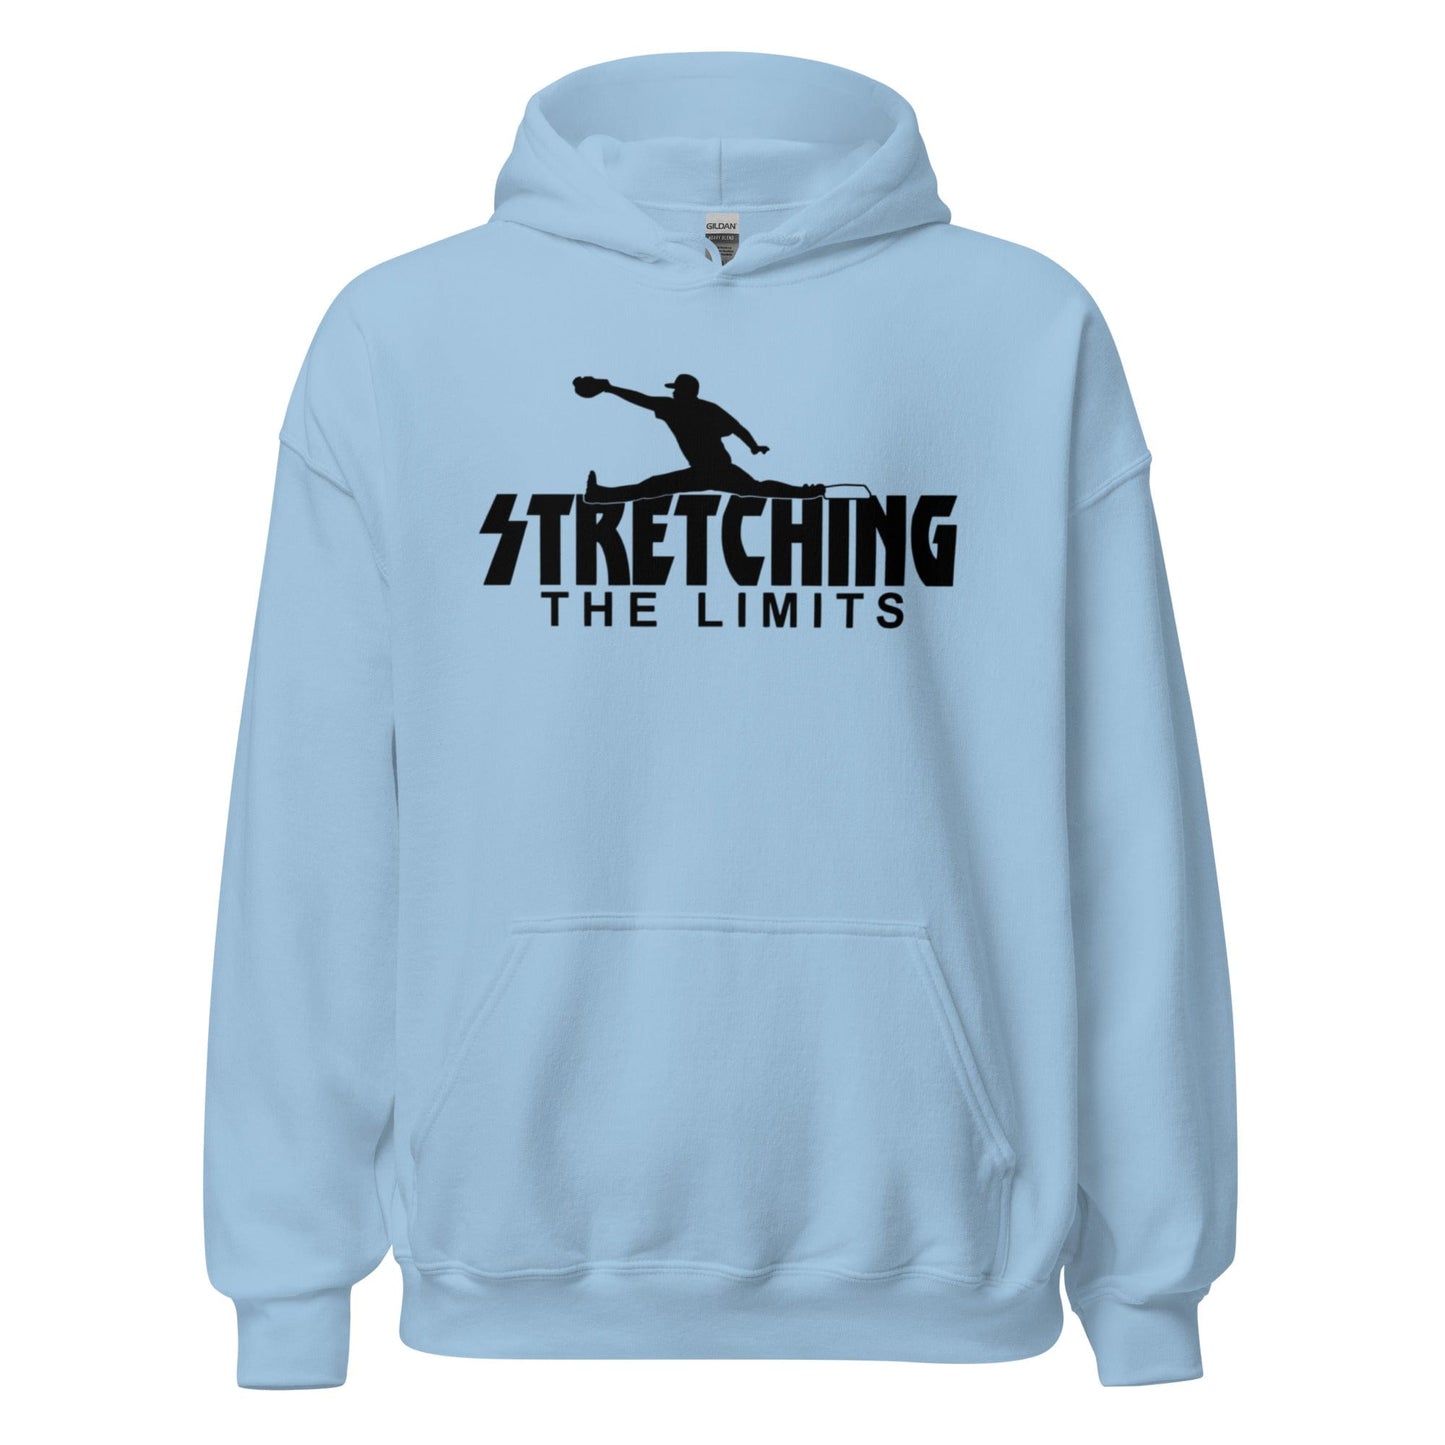 Stretching The Limits - Adult Hoodie